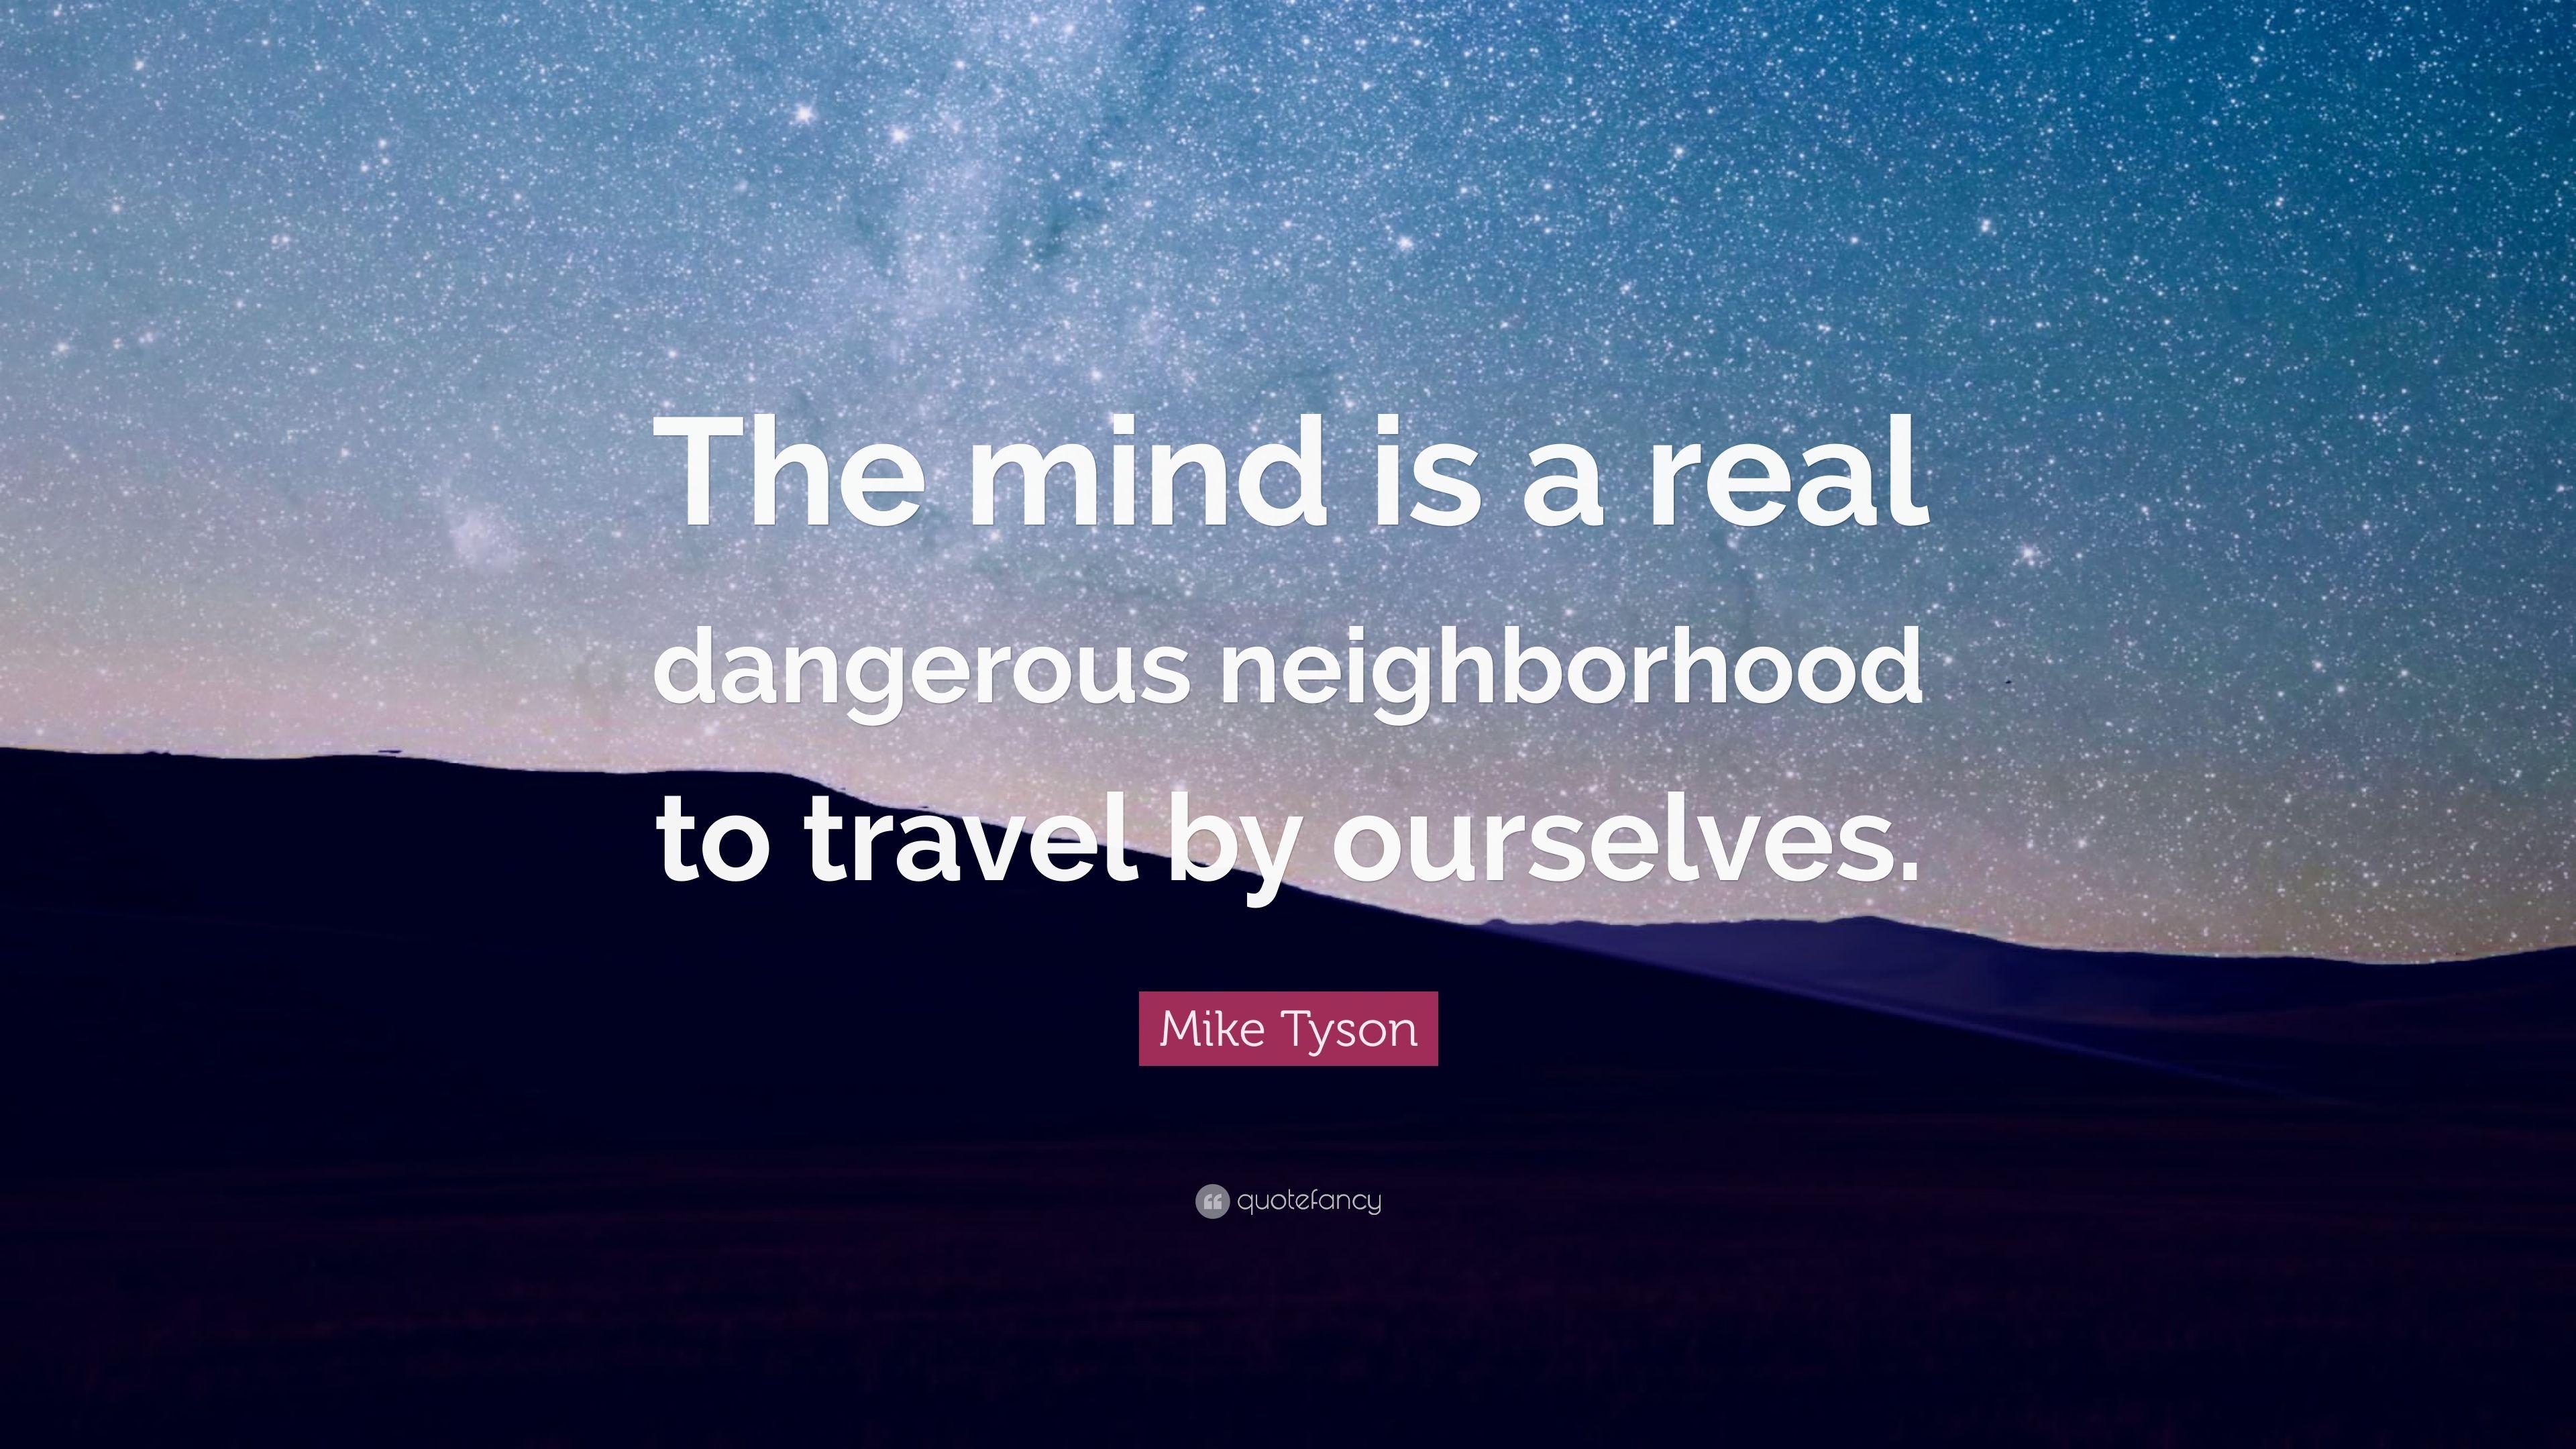 Mike Tyson Quote: “The mind is a real dangerous neighborhood to